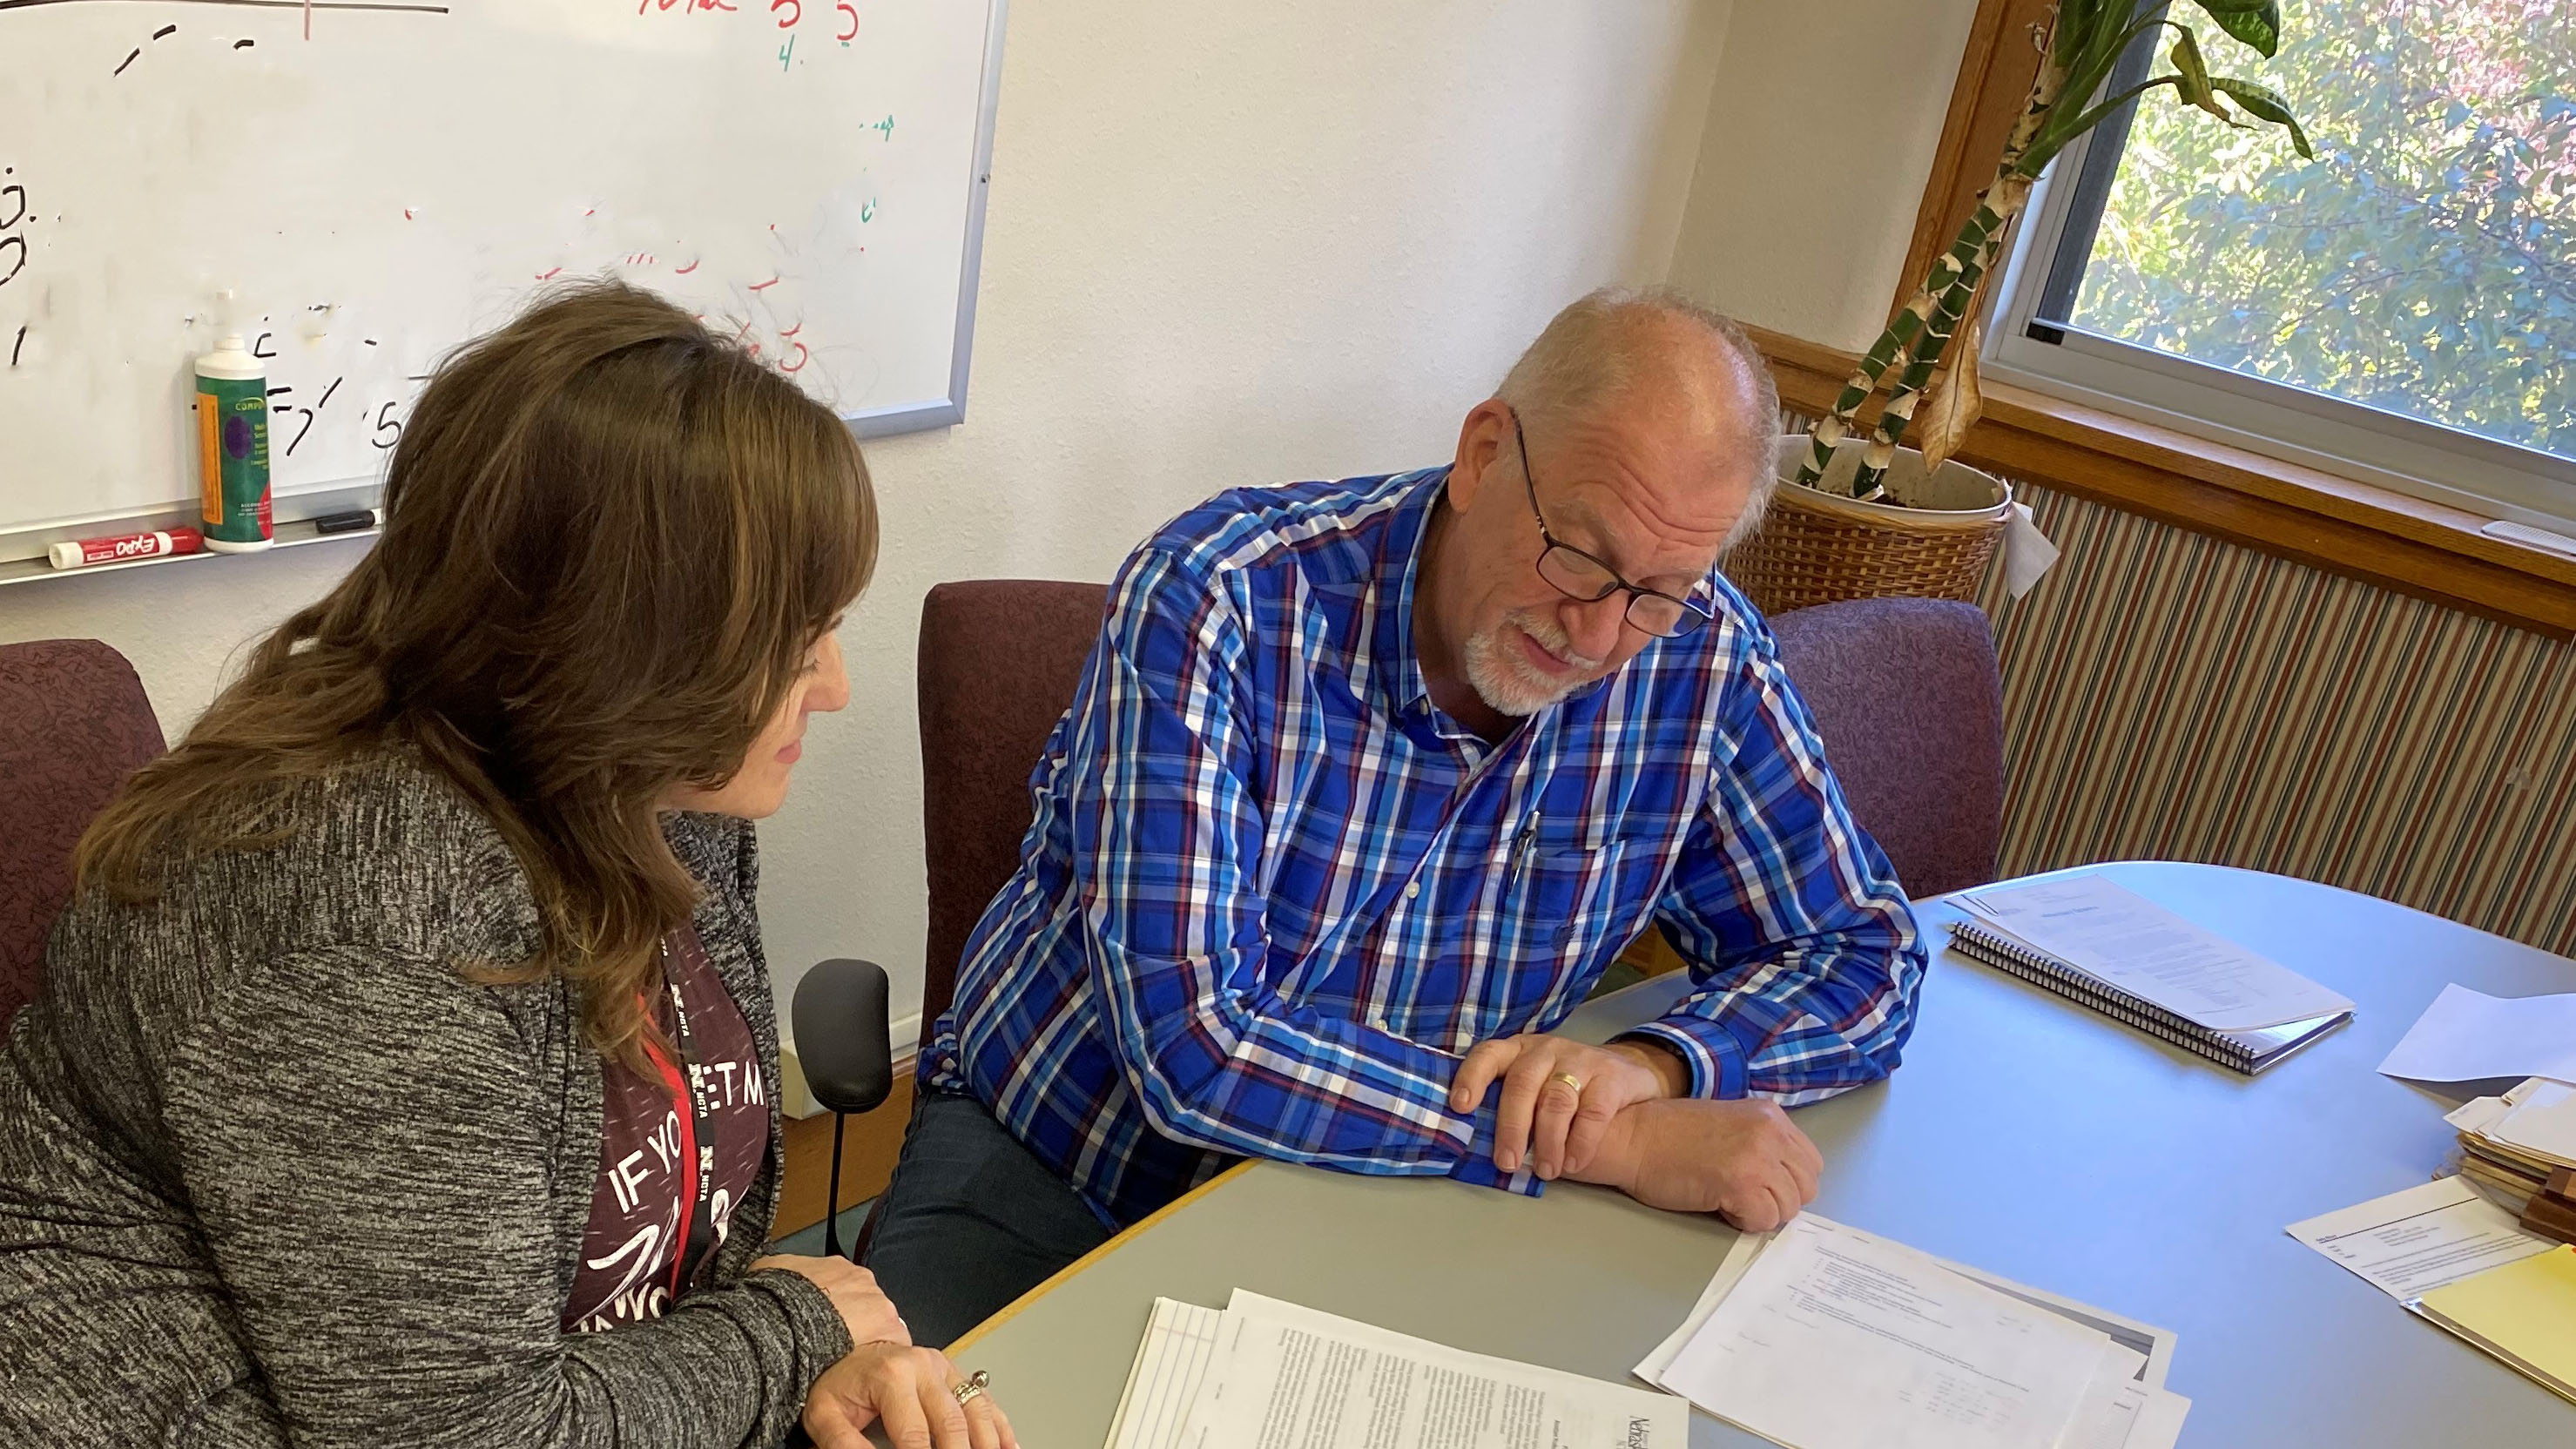 NCTA Associate Dean Jennifer McConville and Dr. Larry Gossen have an initial planning session in May. Dr. Gossen assumed duties as the new dean of the Nebraska College of Technical Agriculture on June 15. (NCTA photo)